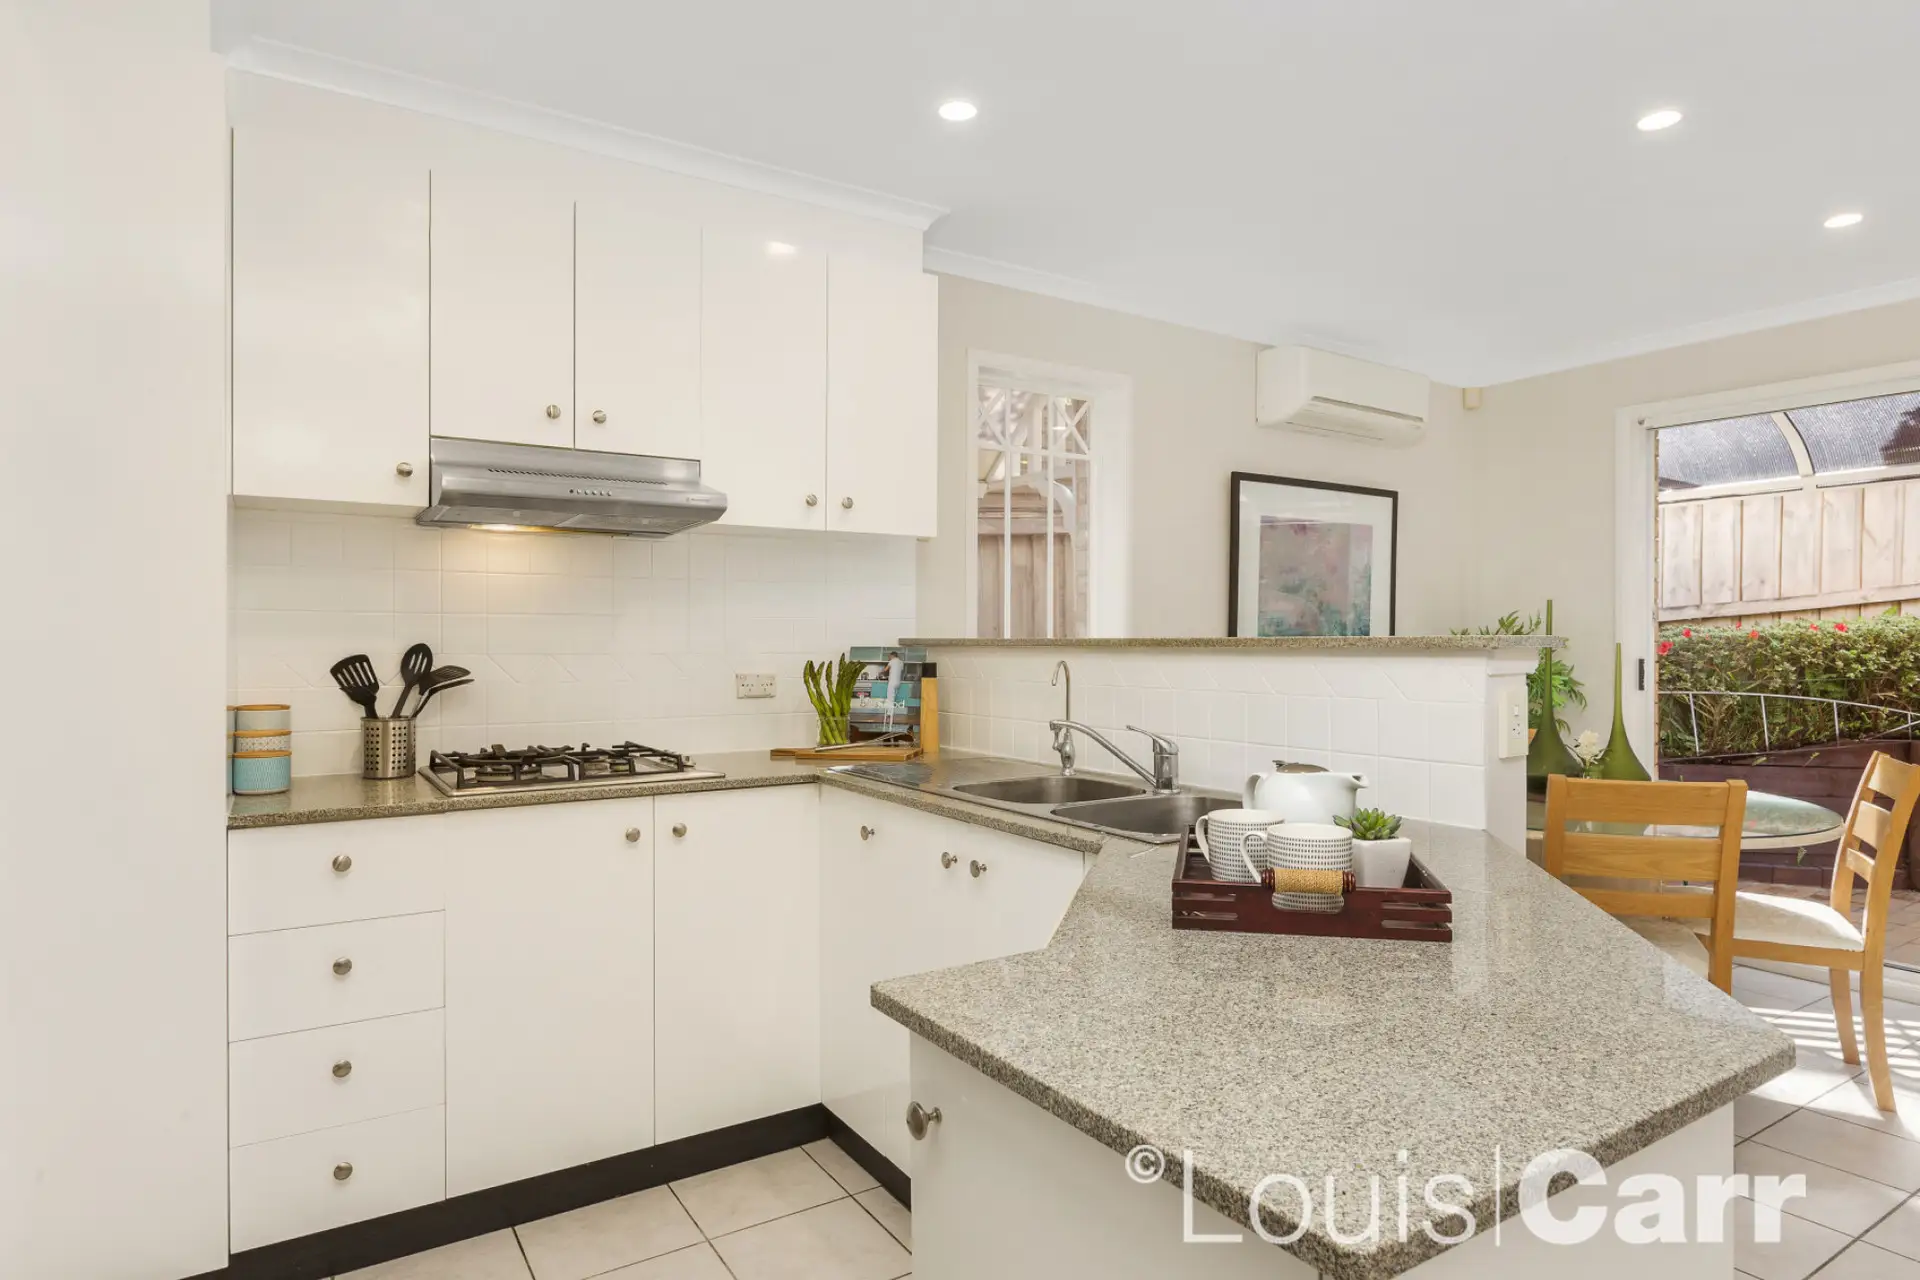 Photo #3: 17 Tennyson Close, Cherrybrook - Sold by Louis Carr Real Estate